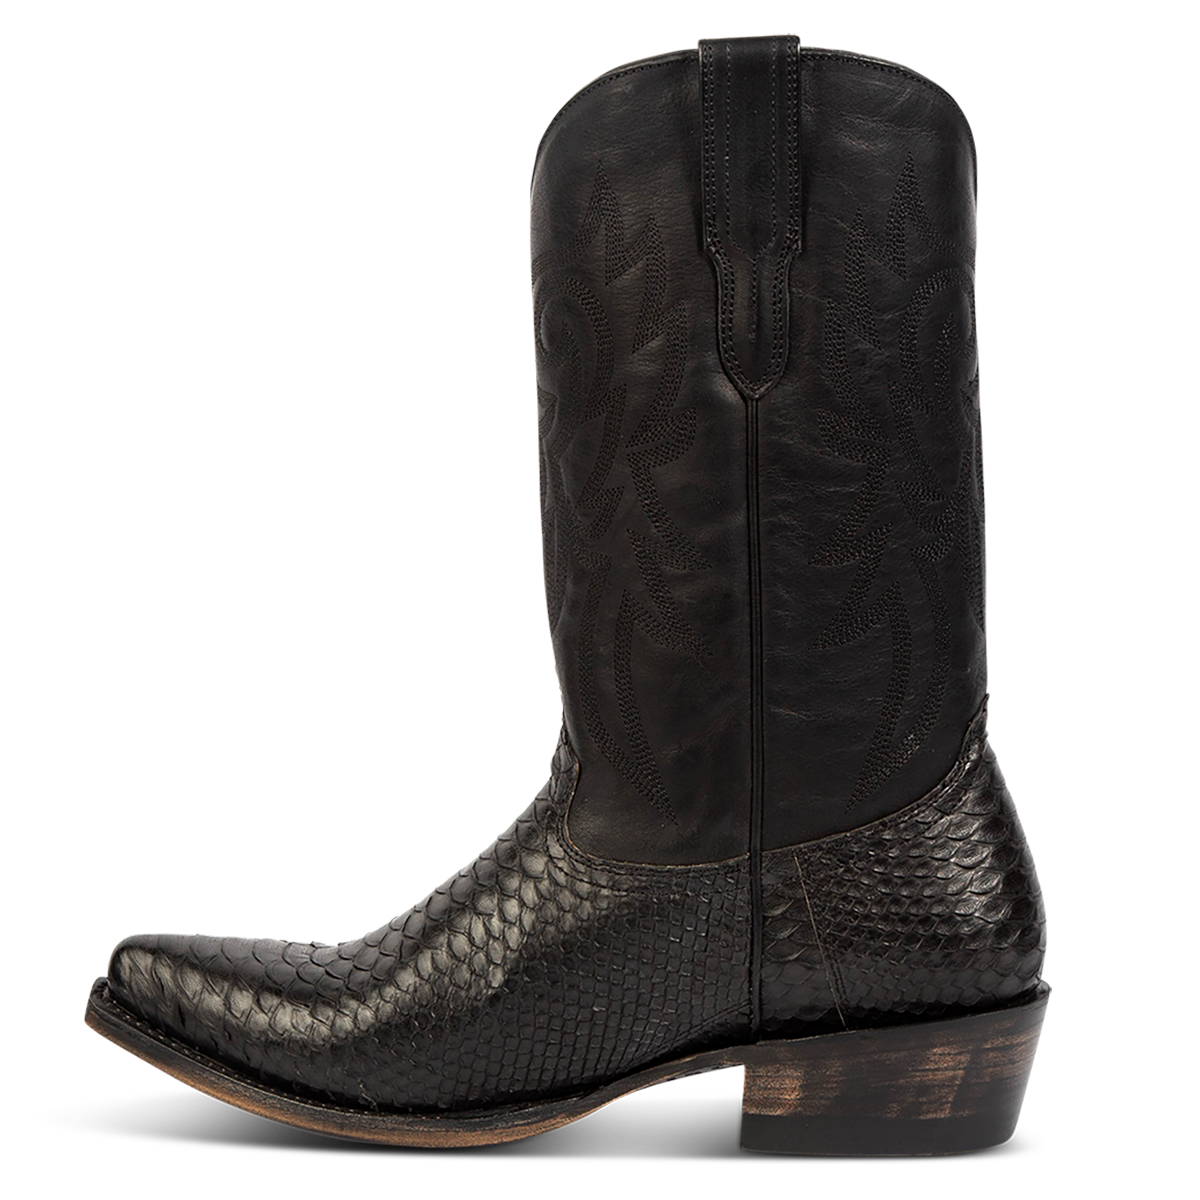 Inside view FREEBIRD men's Marshall black python leather western cowboy boot with shaft stitch detailing, snip toe construction and leather pull straps